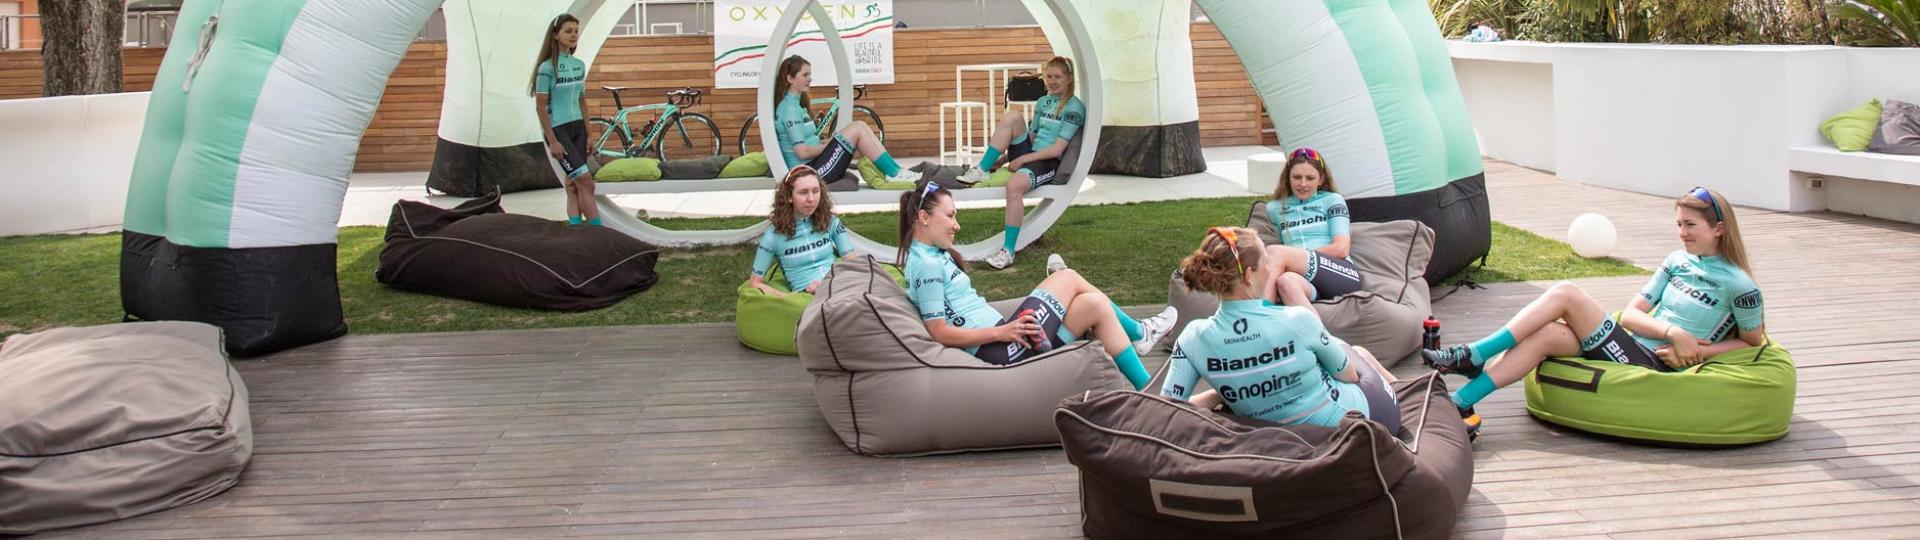 cycling.oxygenhotel en special-guest-cycling-rimini 012